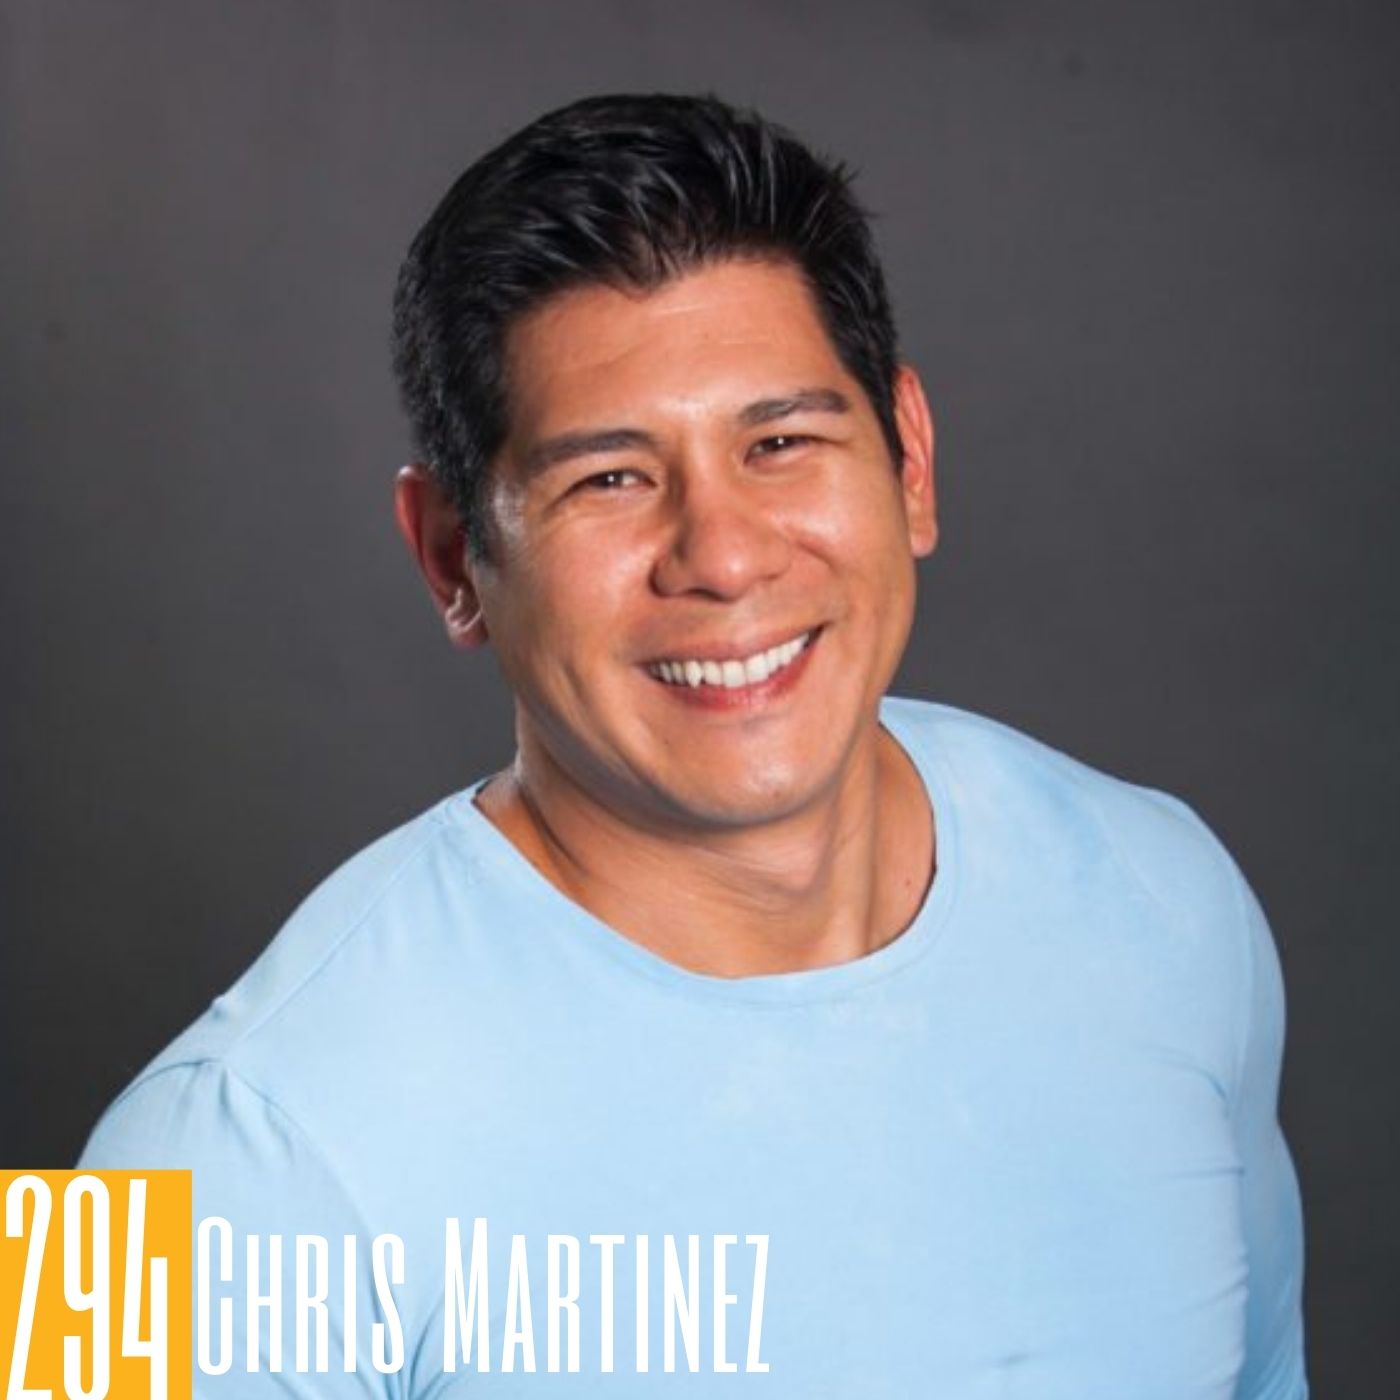 294 Chris Martinez - Mexican Wrestling & Hidden Gems in Remote Teams Telling the Whole Story